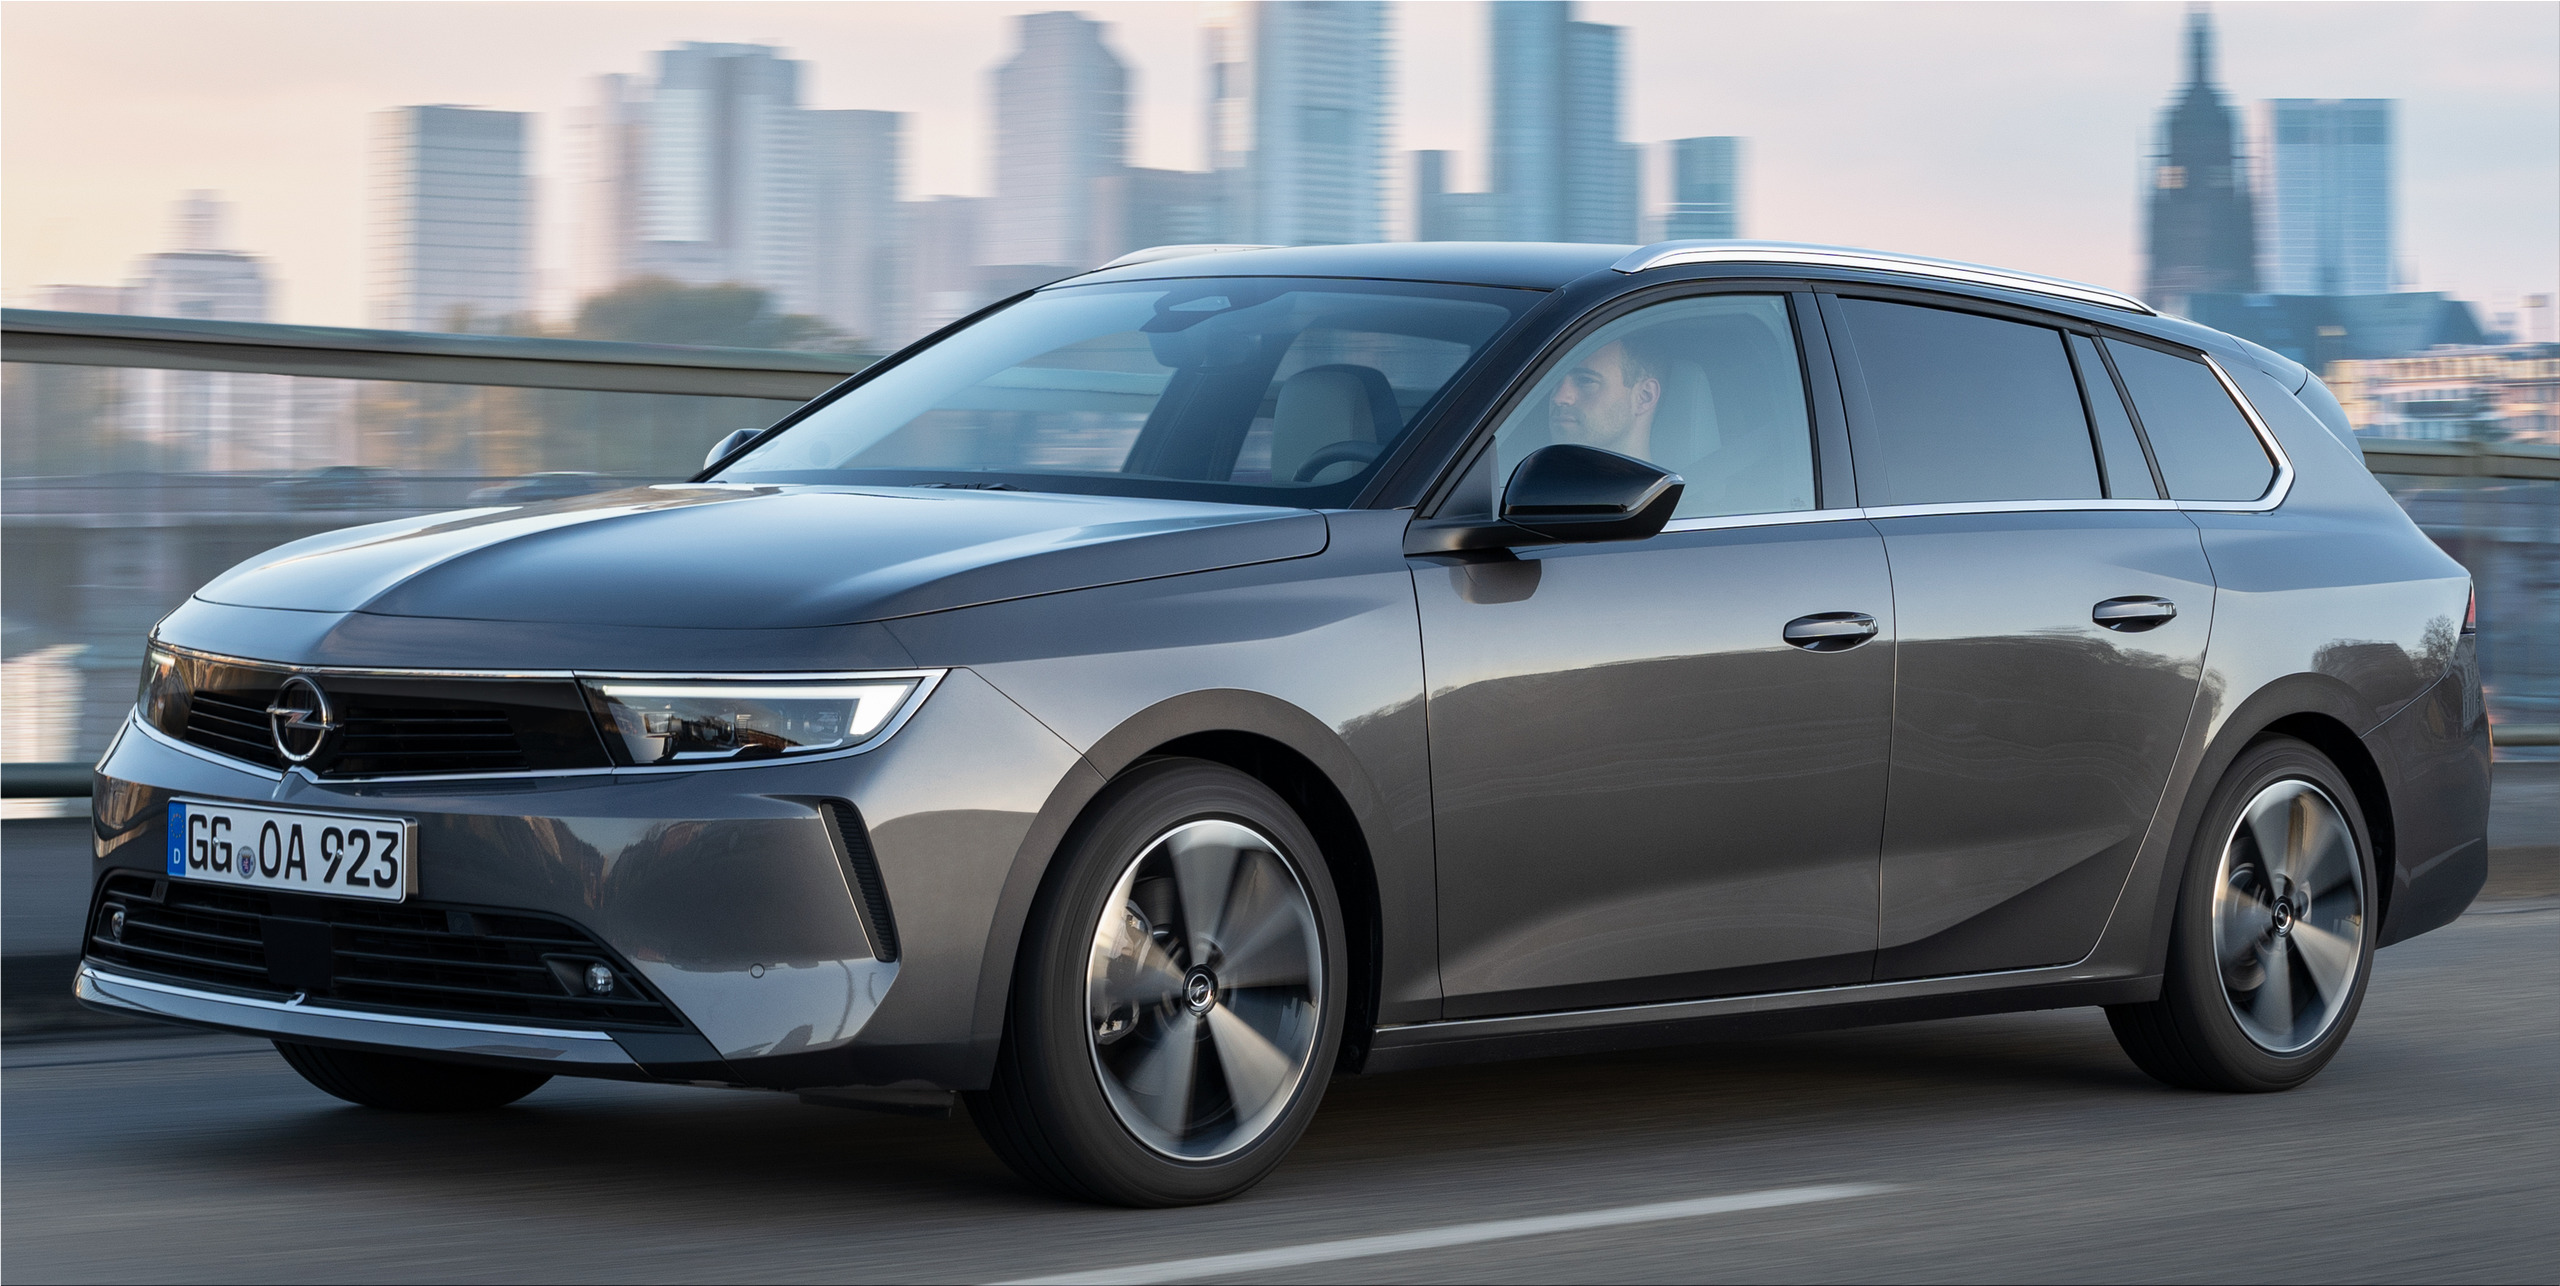 The new Opel Astra Sports Tourer is a chic family car